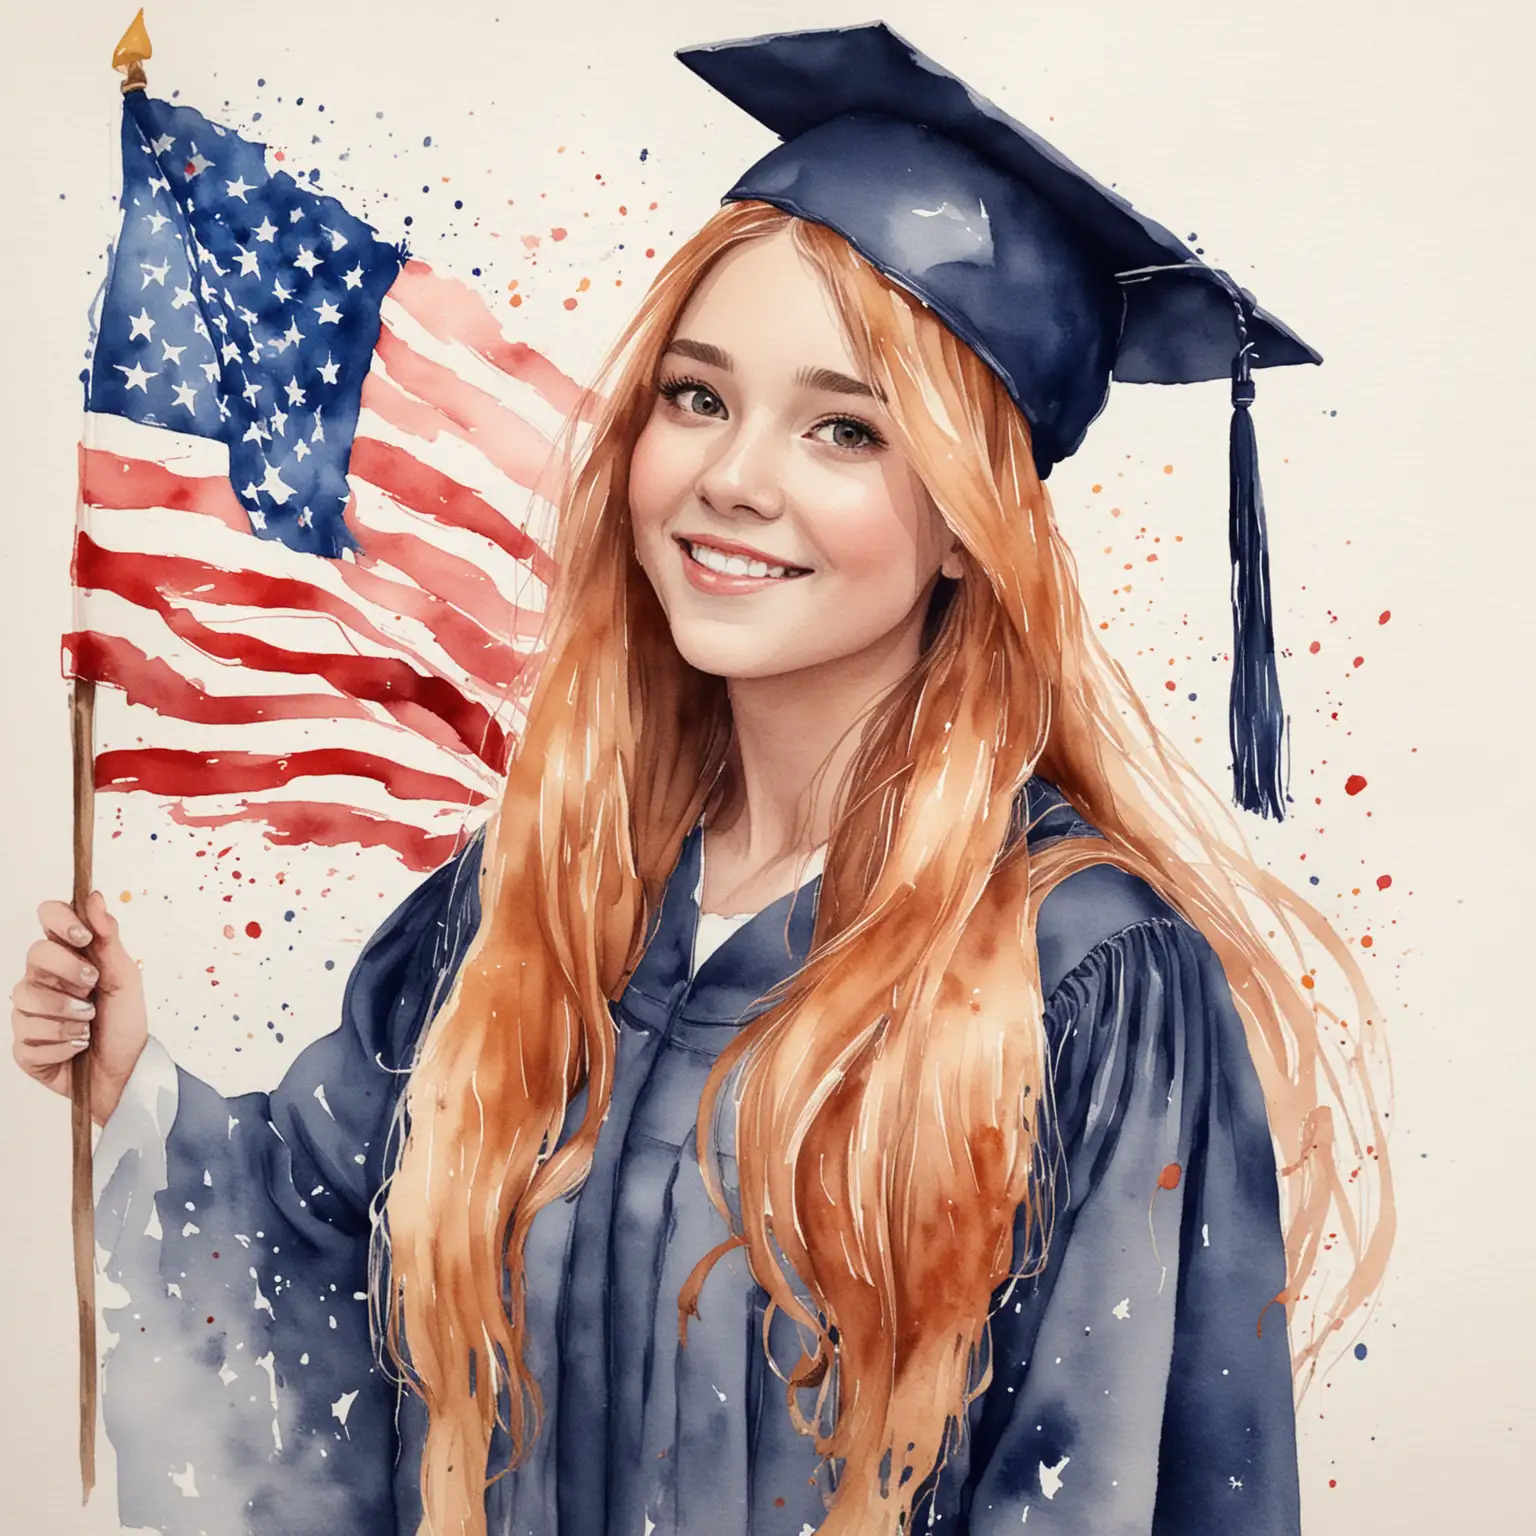 Young Woman Graduating in the USA with Watercolor Portrait